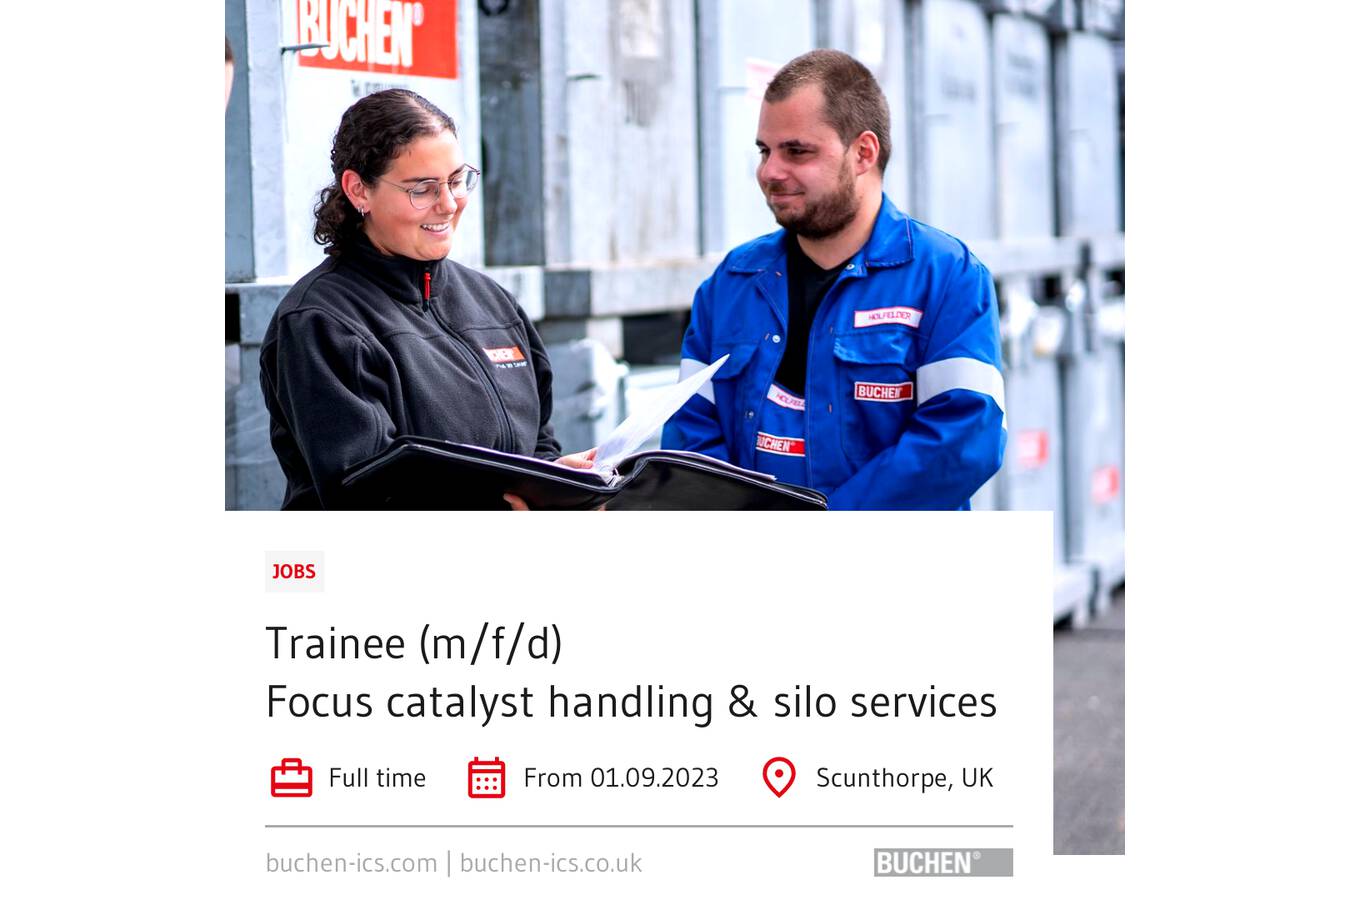 BUCHEN-ICS-UK searches Trainee in Catalyst Handling & Silo Cleaning Are you a young, ambitious individual seeking your first experience in the industrial services sector? Do you have a passion for learning new skills and working in a dynamic environment? If so, we have the perfect opportunity for you.